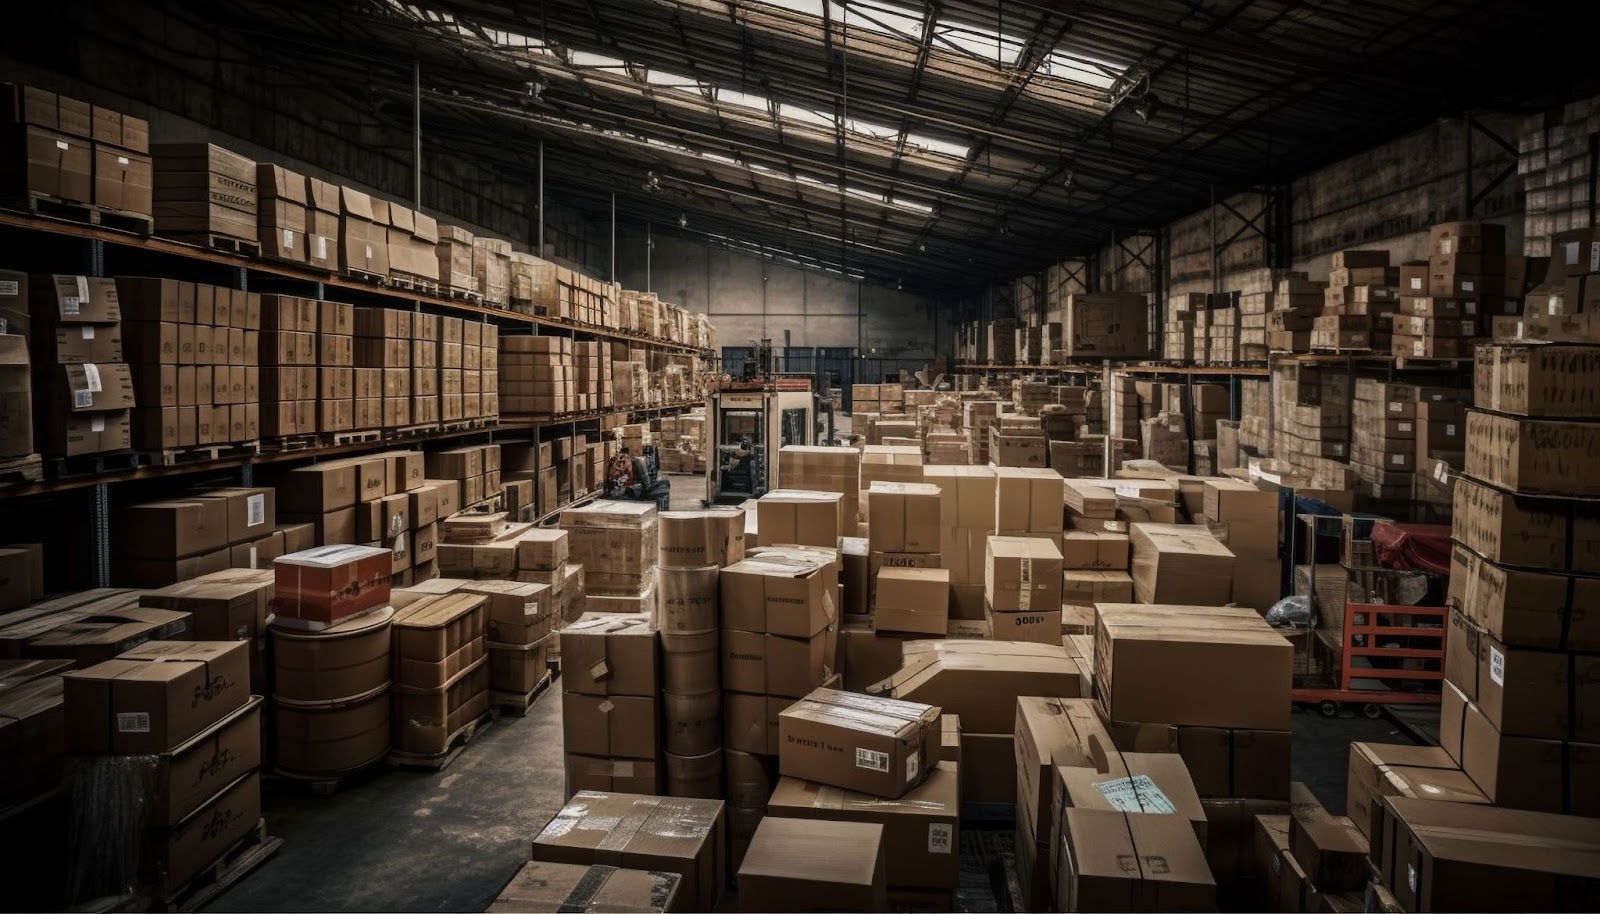 Product sourcing at a warehouse.